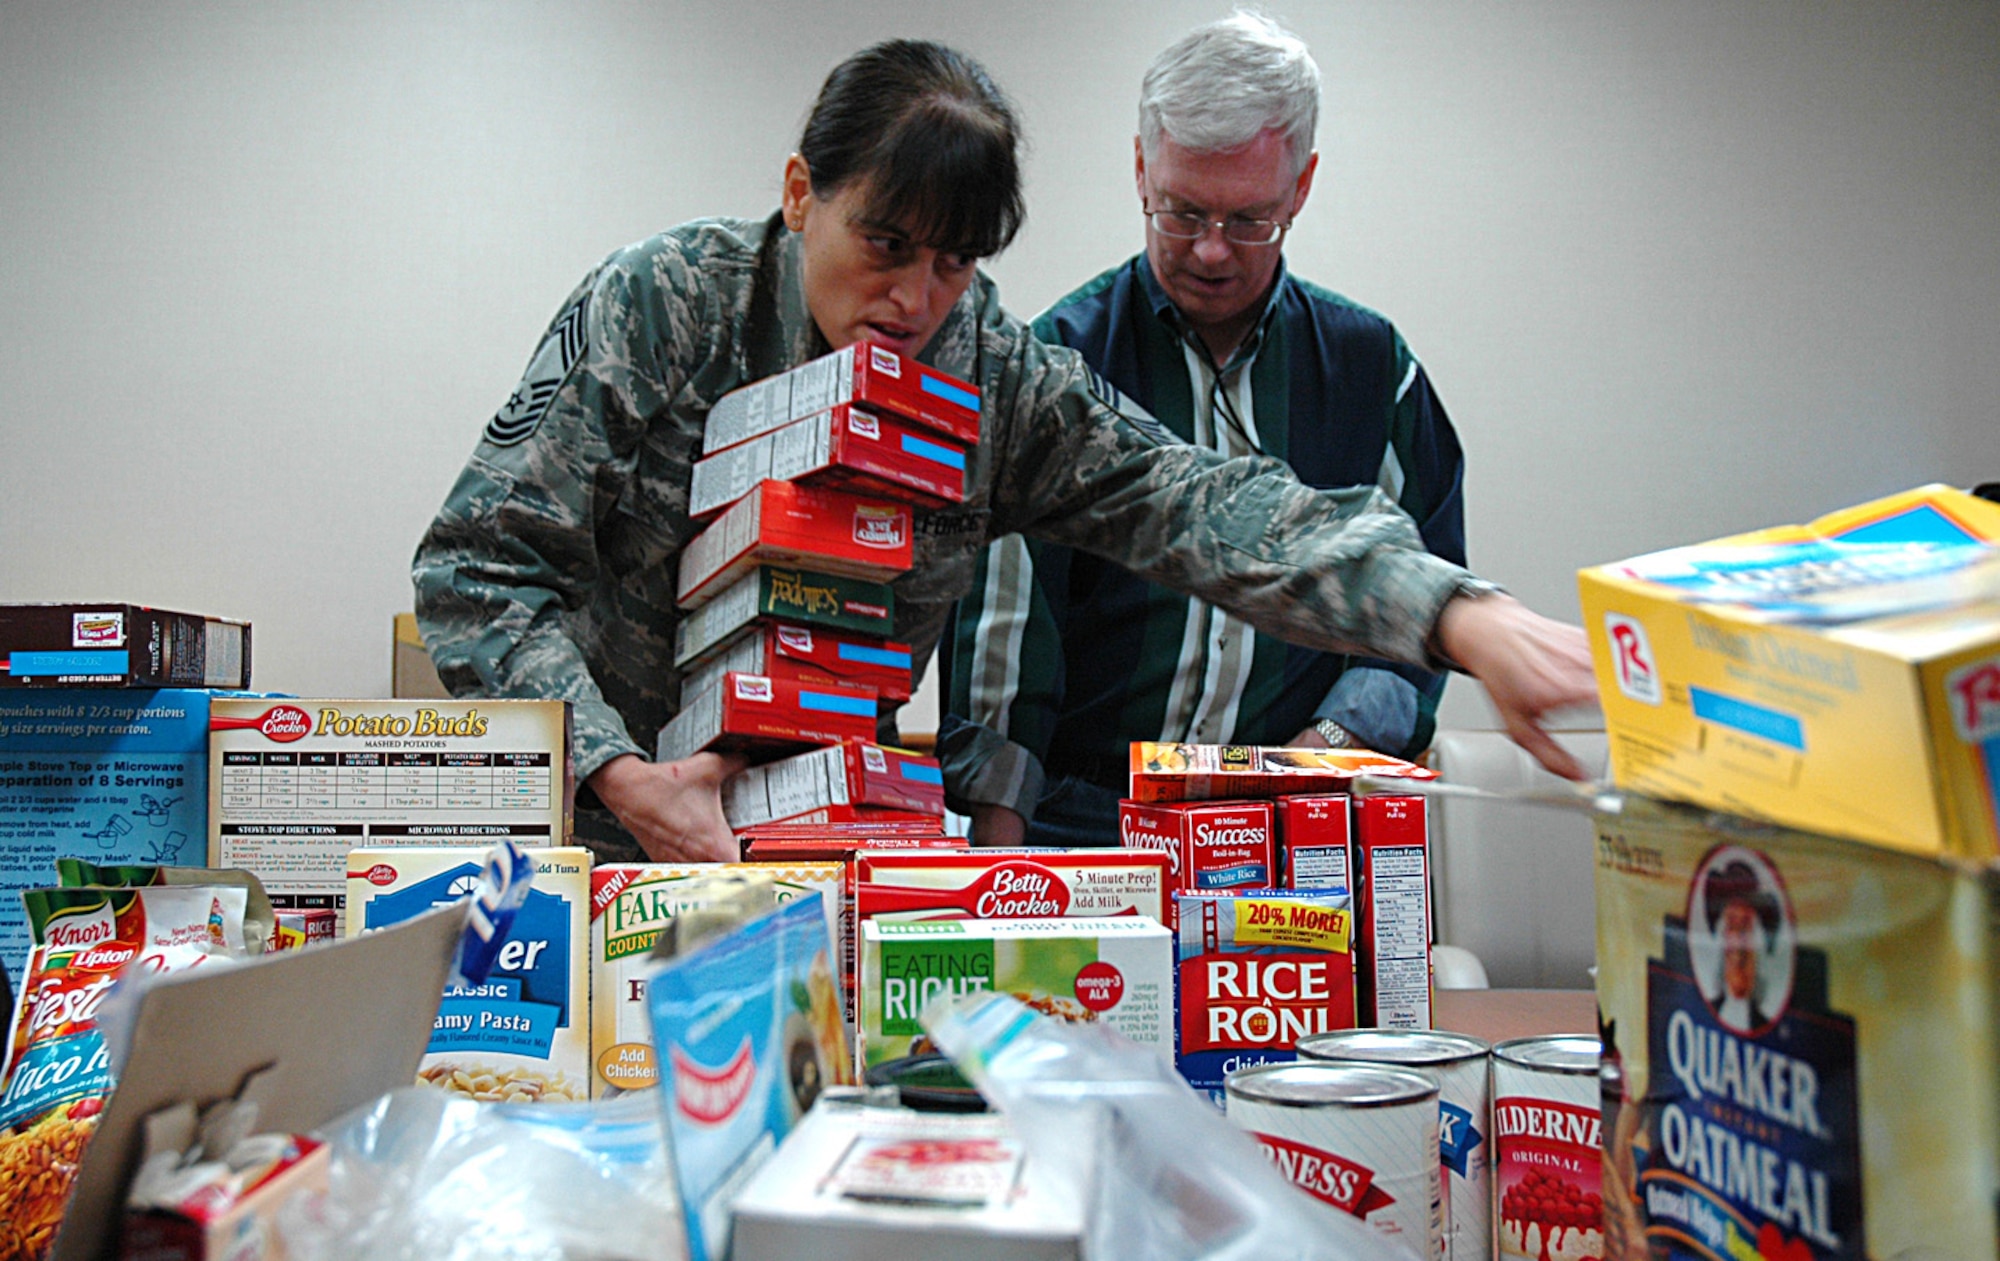 MCCHORD AIR FORCE BASE, Wash., - Chief Master Sgt. Mary Smith, 97th Airlift Squadron (left), and Carl Supplee, director of the 446th Mission Support Squadron's Airmen & Family Readiness Center here, sort through food donations as they and nine volunteers put together Thanksgiving Day food baskets for Reserve families in need. (U.S. Air Force photo/Sandra Pishner)